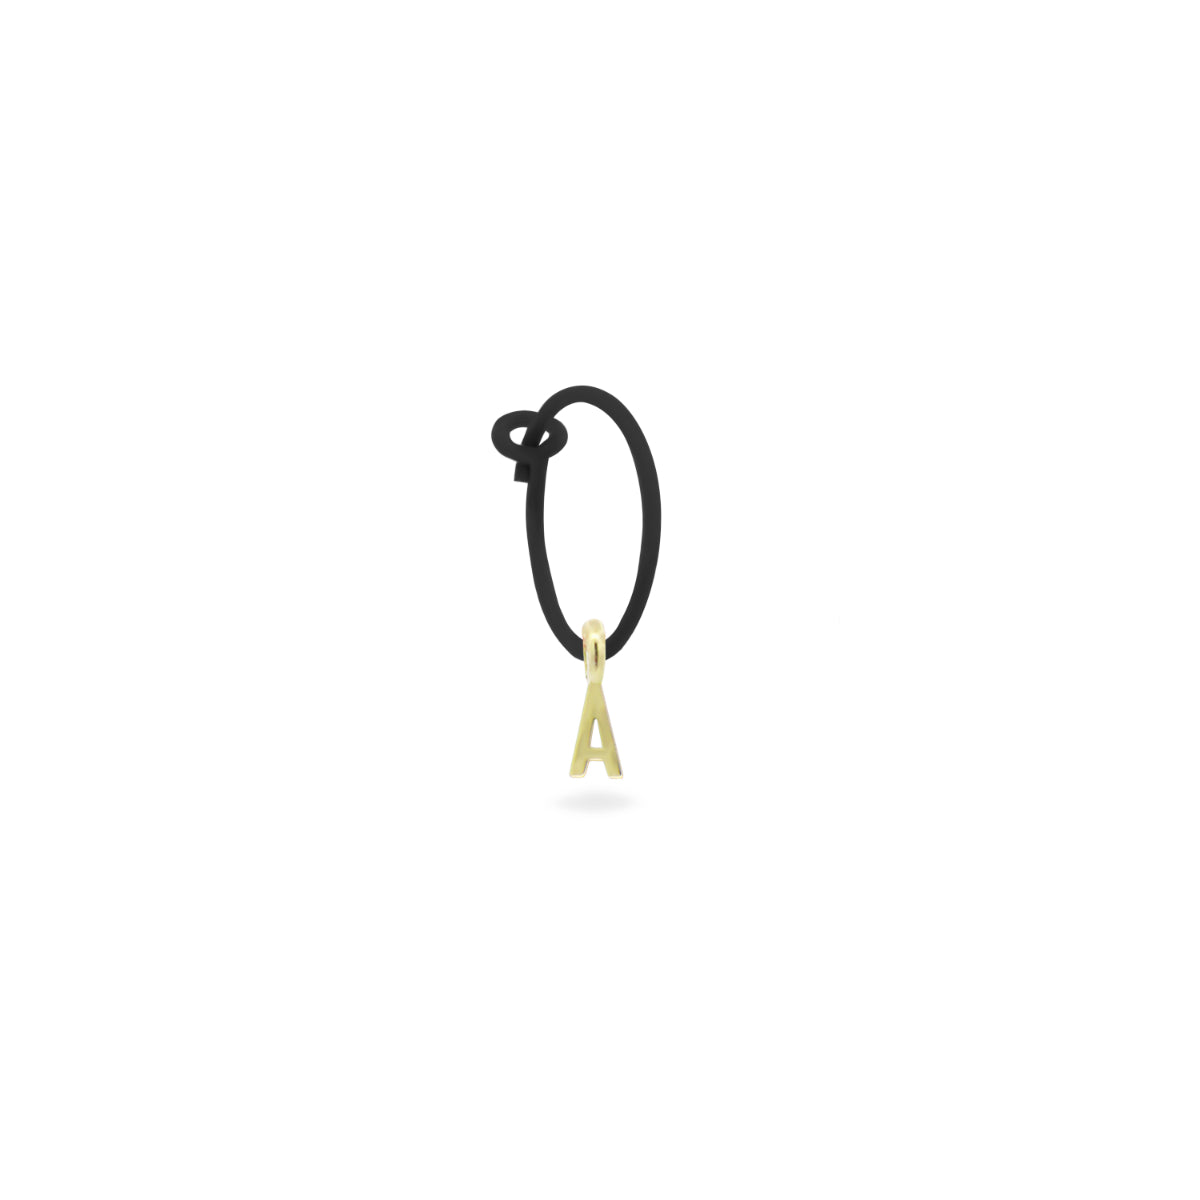 Single earring with a letter Hoop Black - ORO18KT